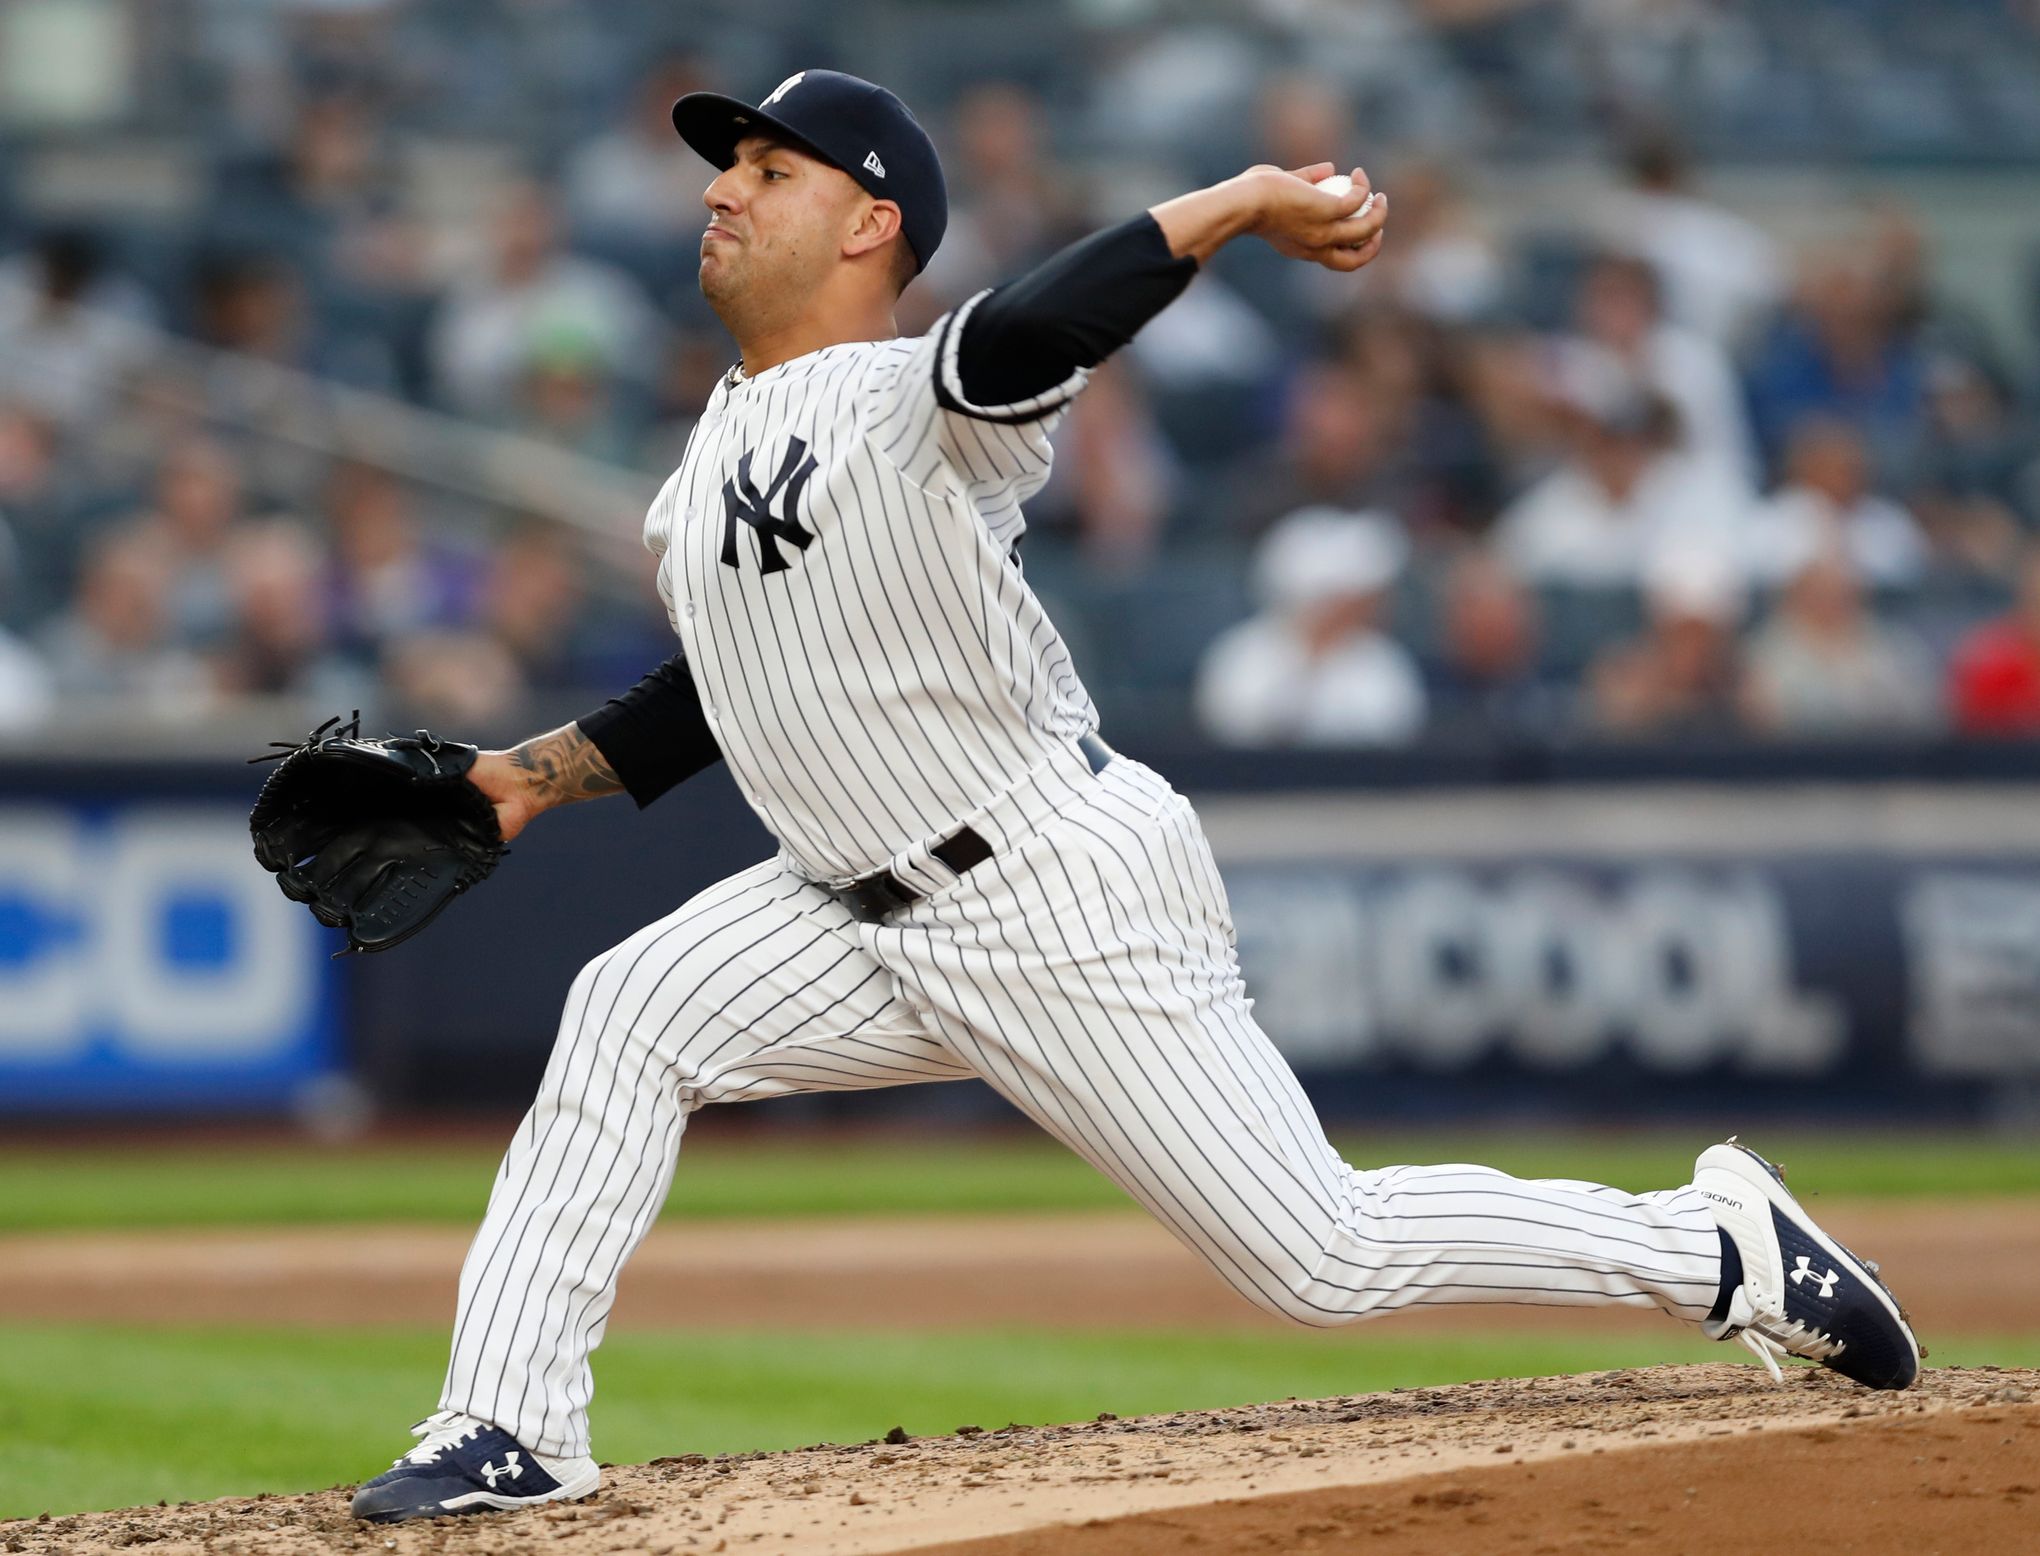 As the legend of Nestor Cortes grows, the Yankees lefty is still scrapping  - The Athletic